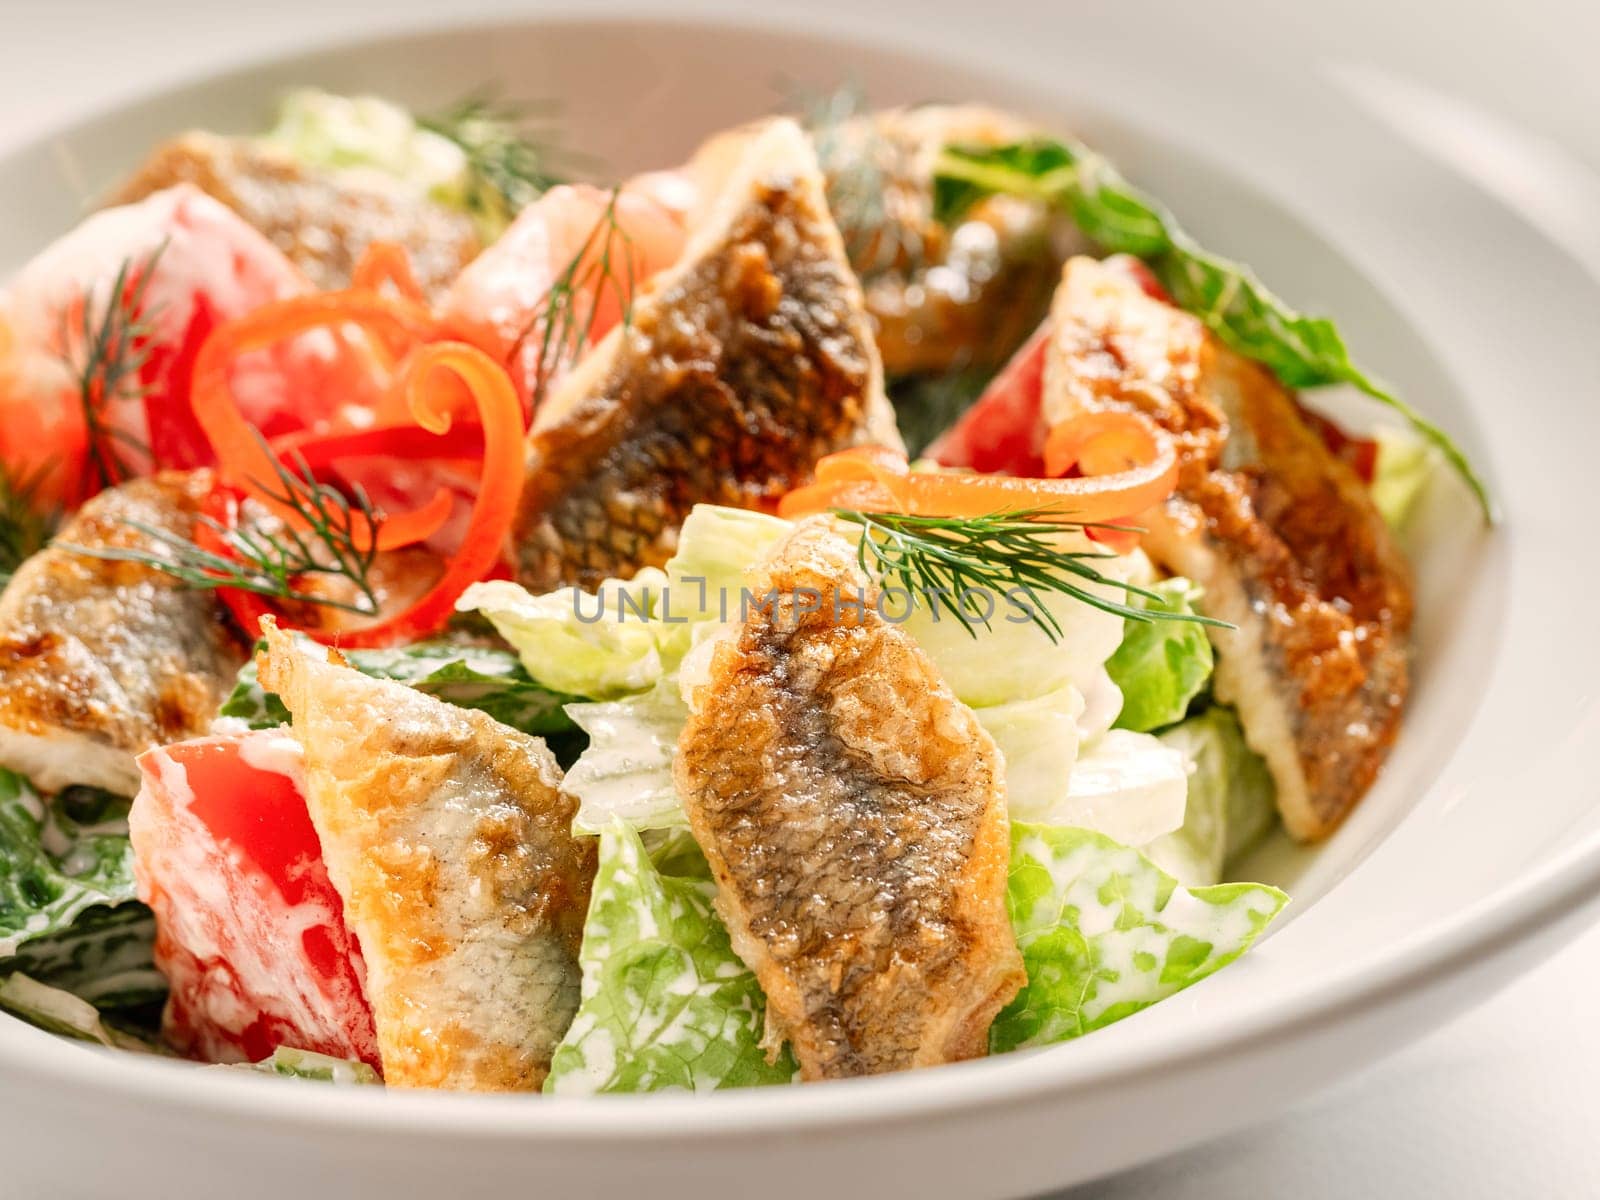 Delicious salad with fried baked smelt fish. Fried fish salad with fresh green lettuce, tomatoes, bell pepper. Ketogenic, keto or paleo diet lunch bowl. Ideas and recipe for fish lunch dishes menu